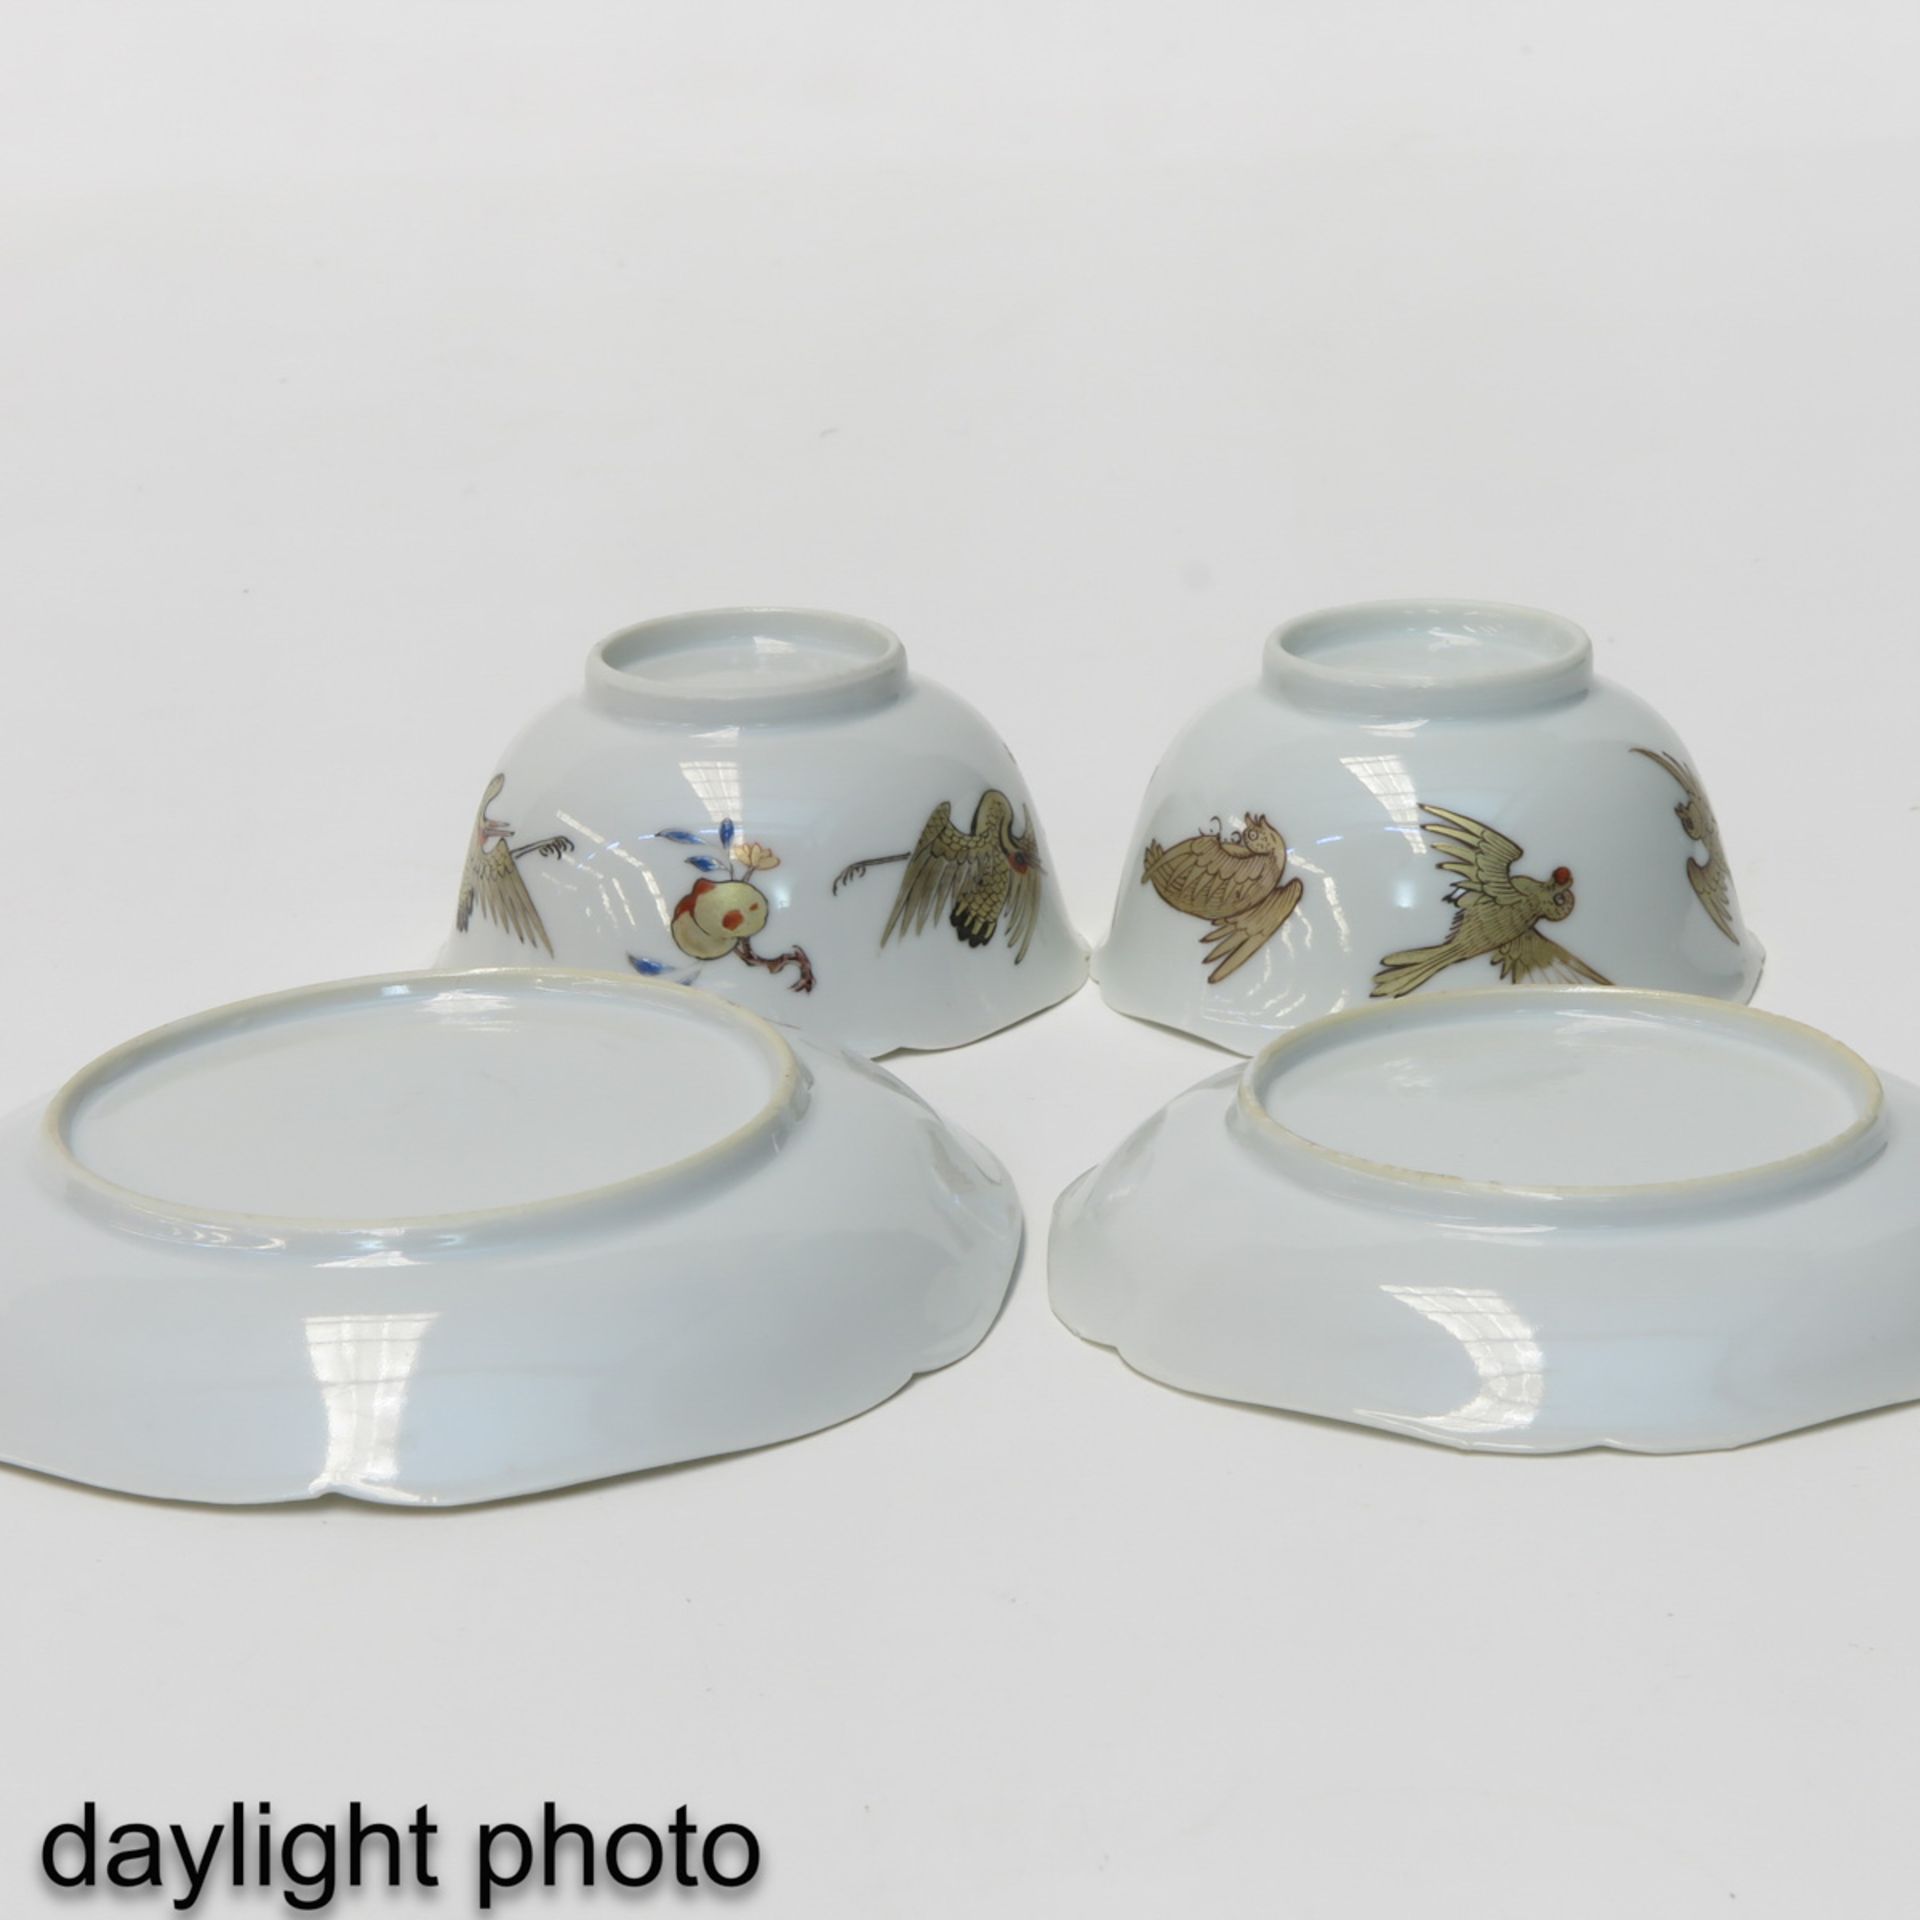 A Collection of 3 Cups and Saucers - Image 10 of 10